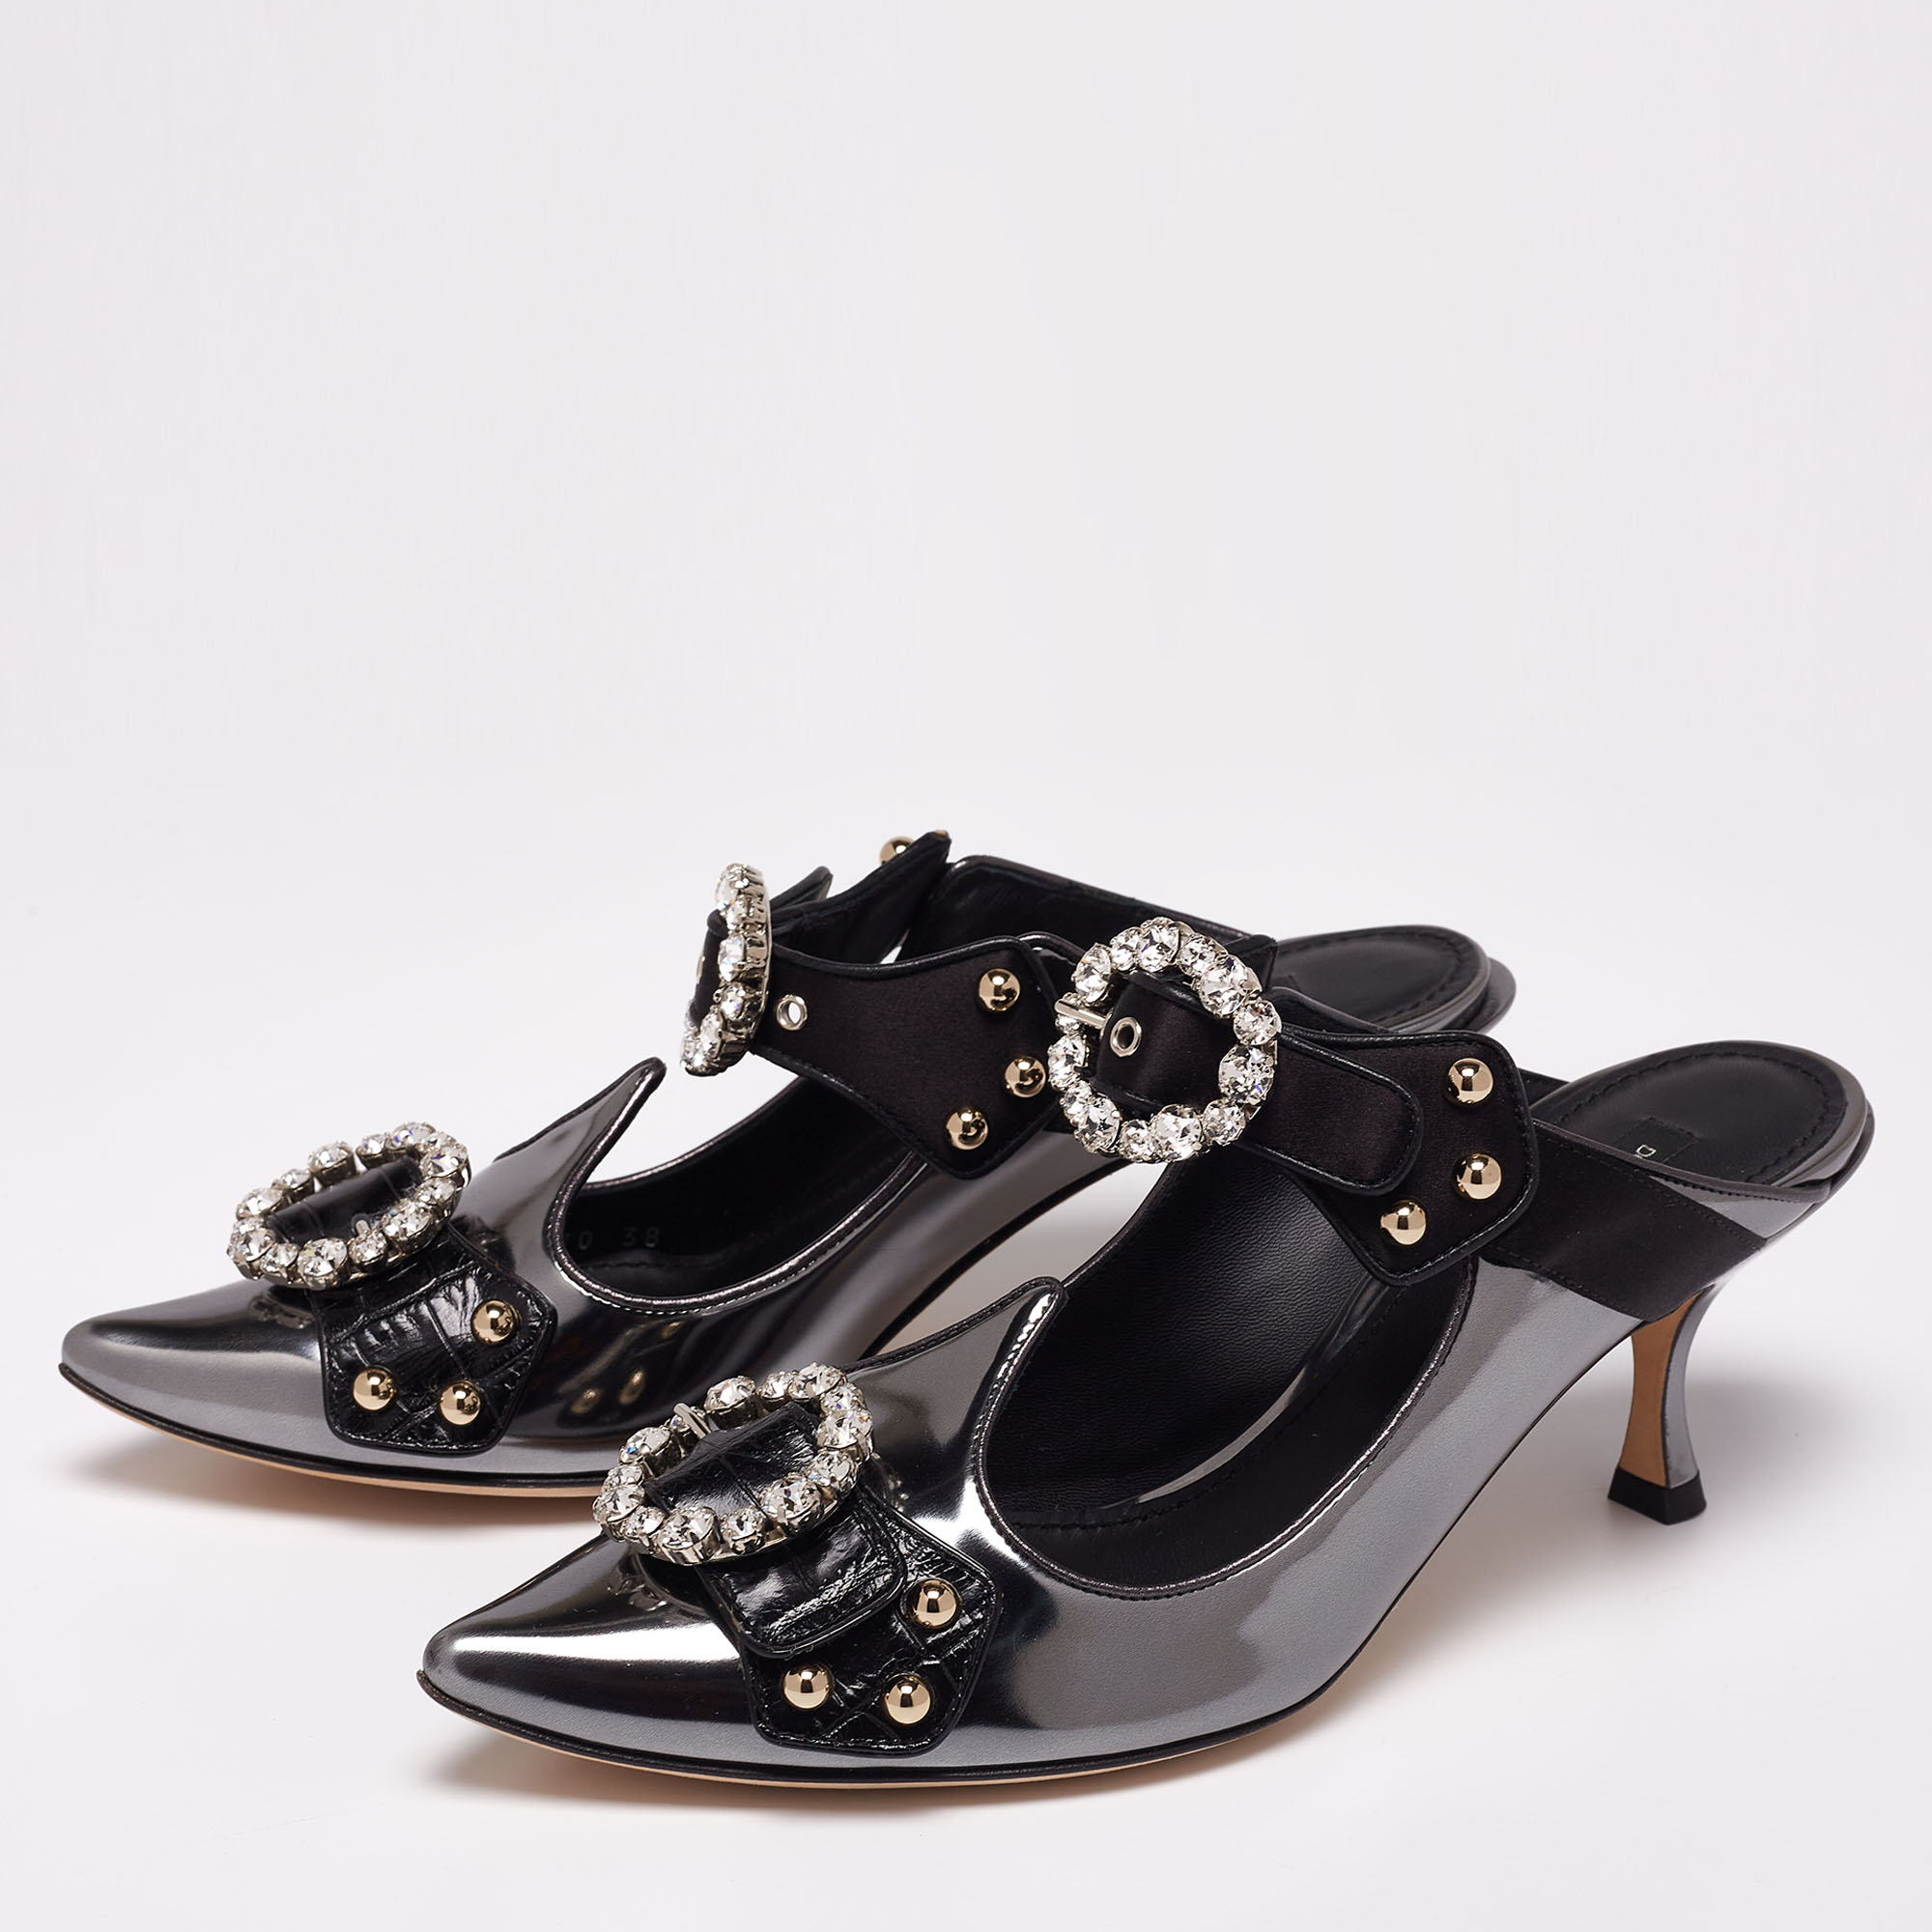 

Dolce & Gabbana Metallic Grey/Black Patent Leather And Satin Crystal Embellished Buckle Mules Size